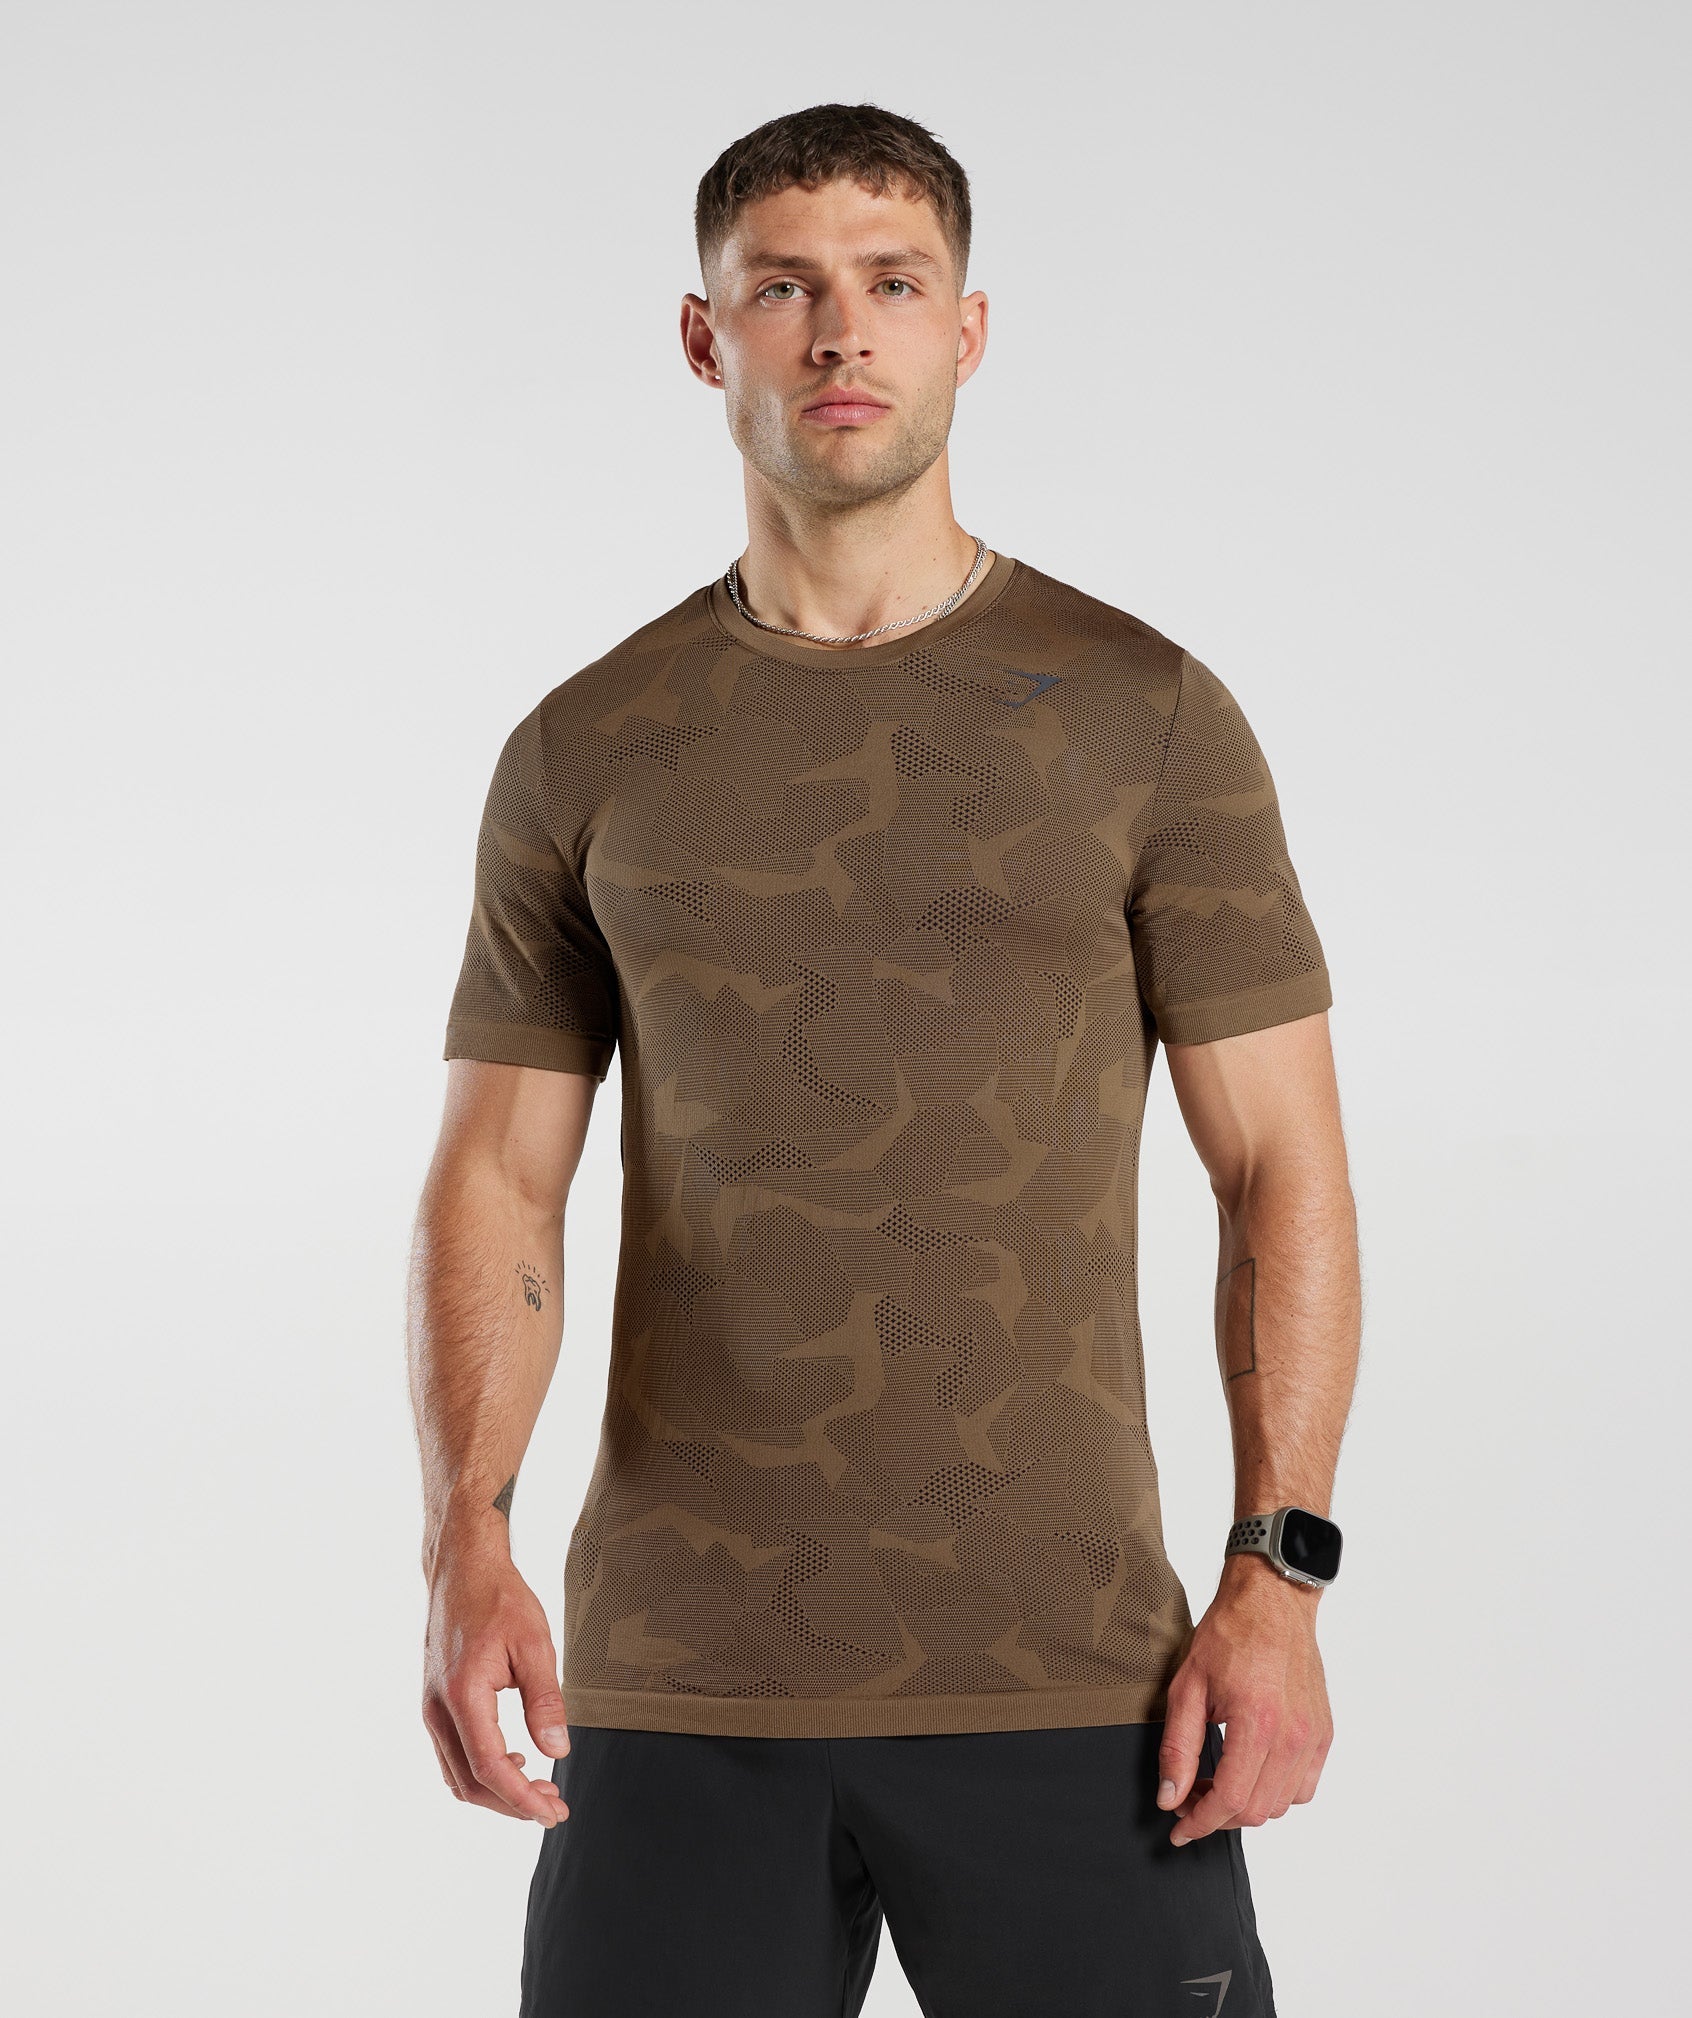 Sport Seamless T-Shirt in Fossil Brown/Black